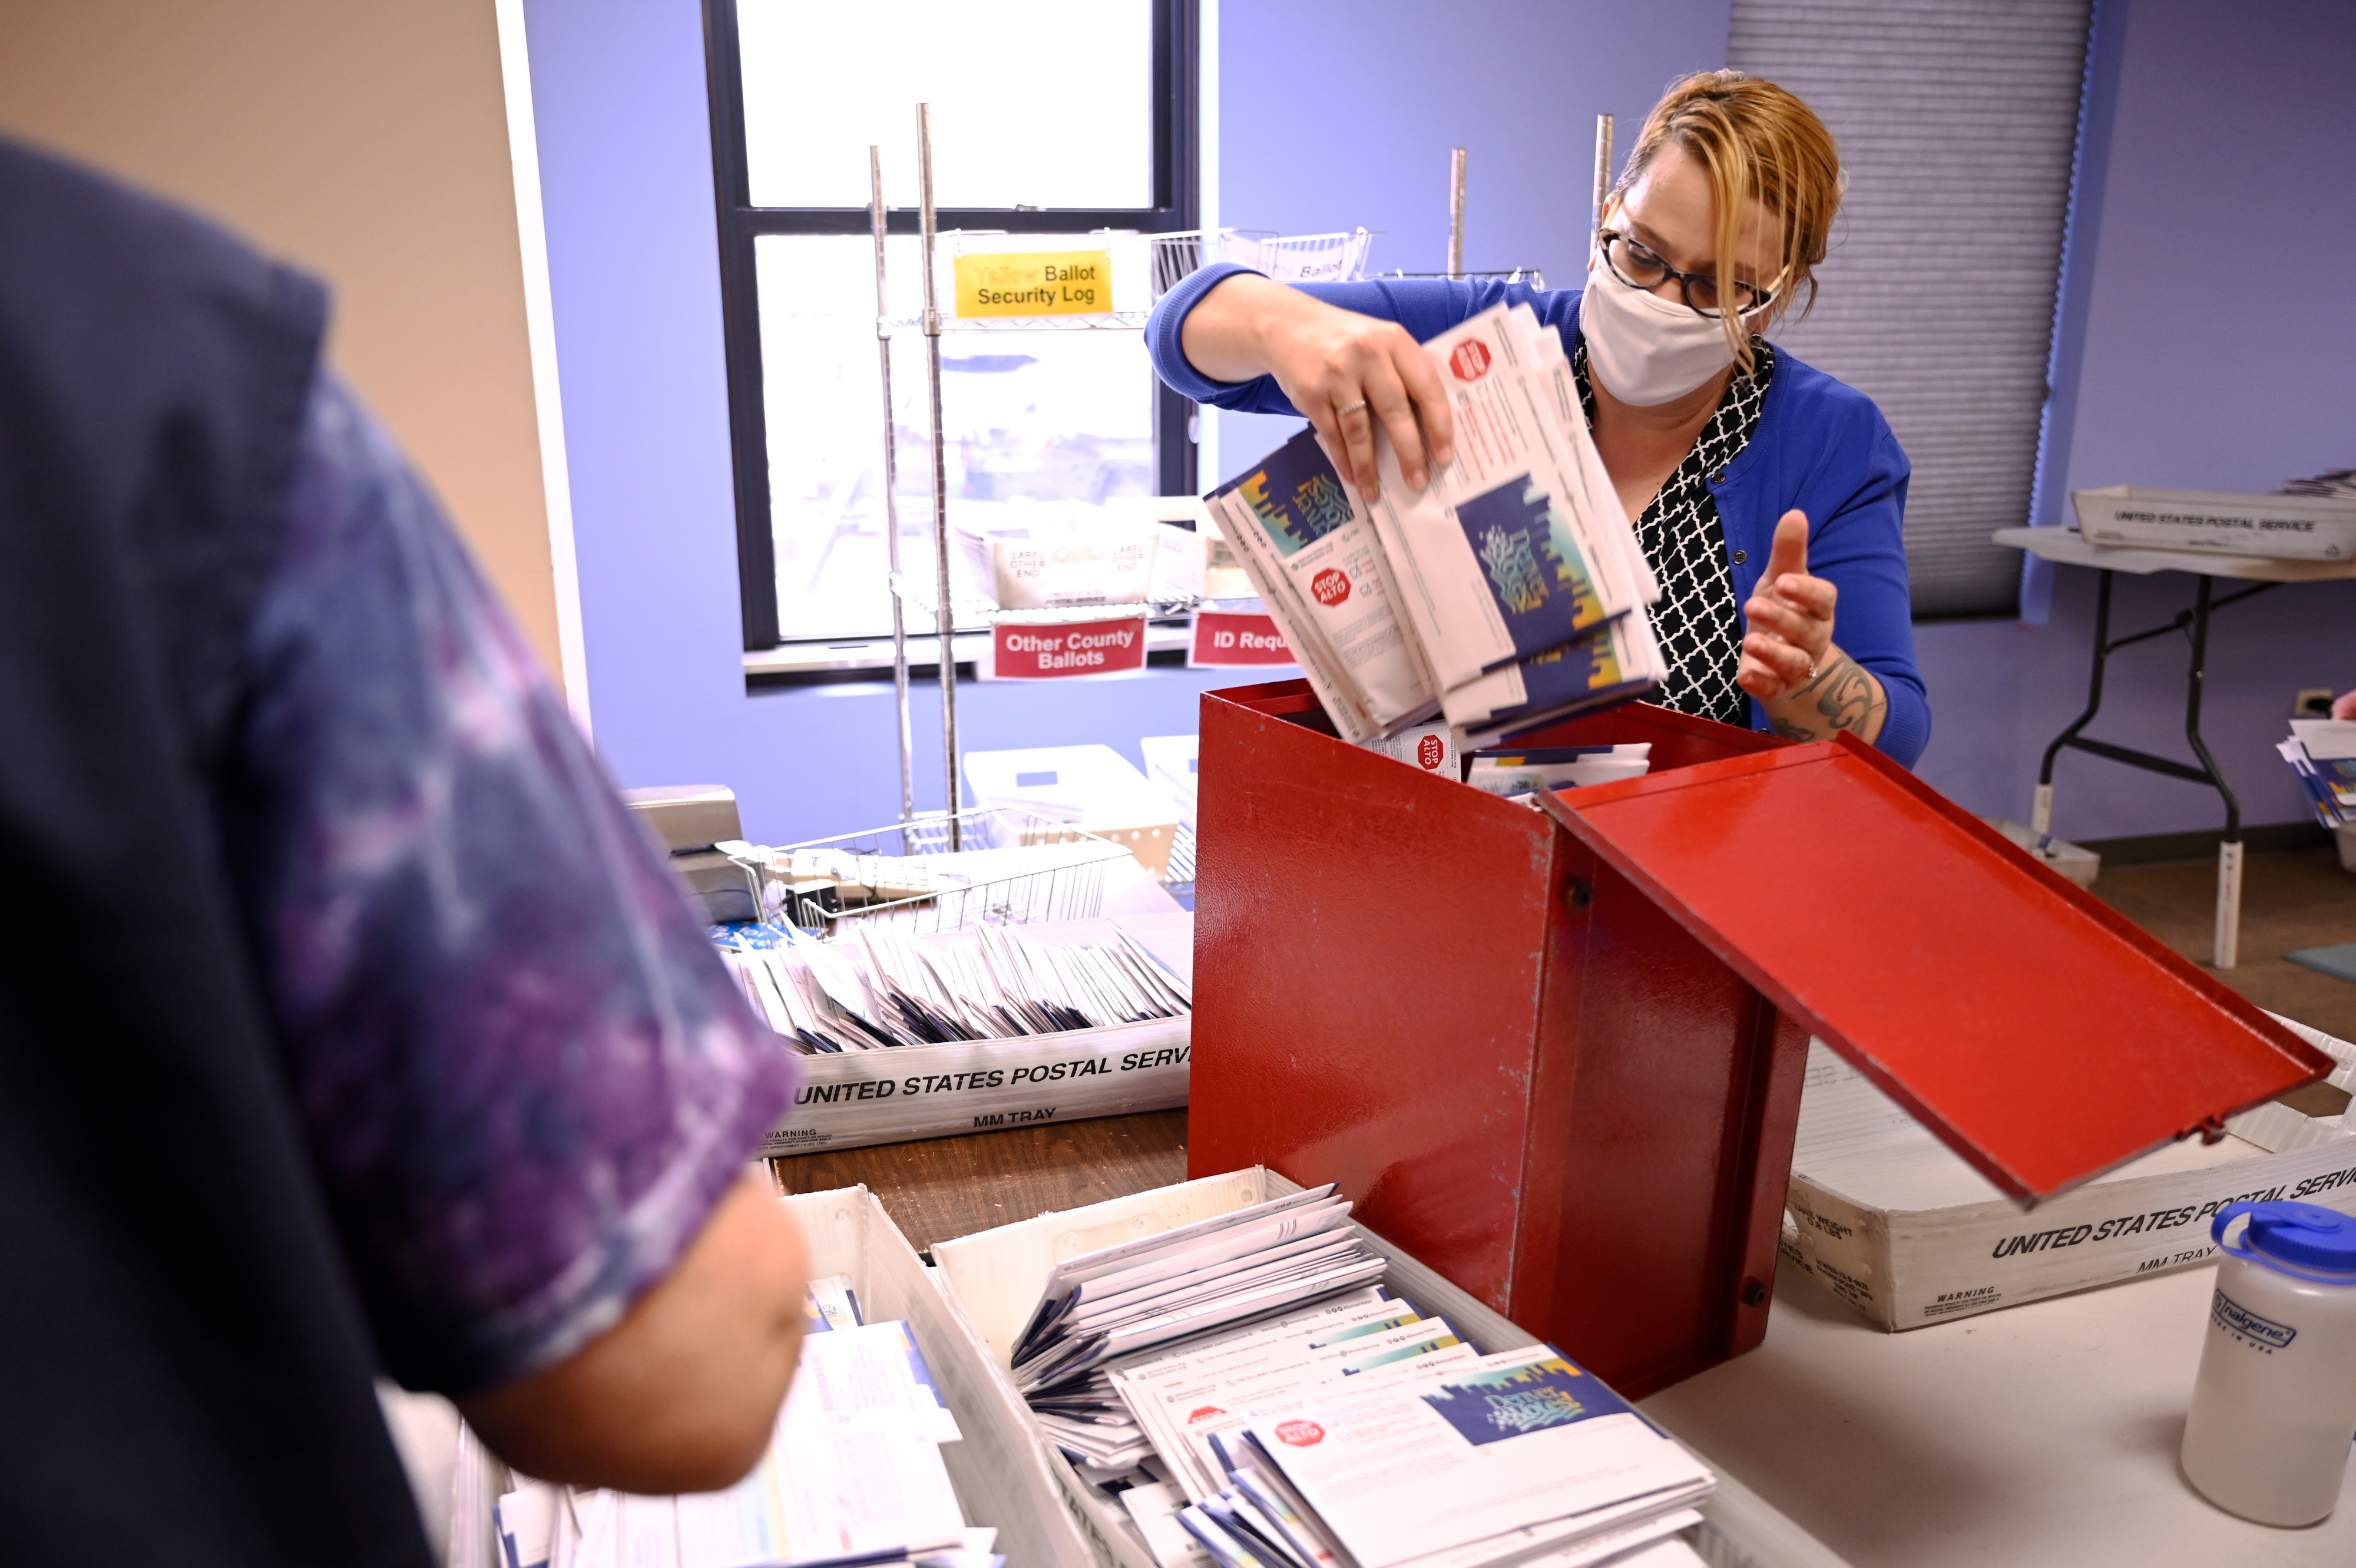 A voting services manager, wearing a mask and blue jacket, pulls a stack of ballots out of a red ballot box, around several bins of sorted ballots.